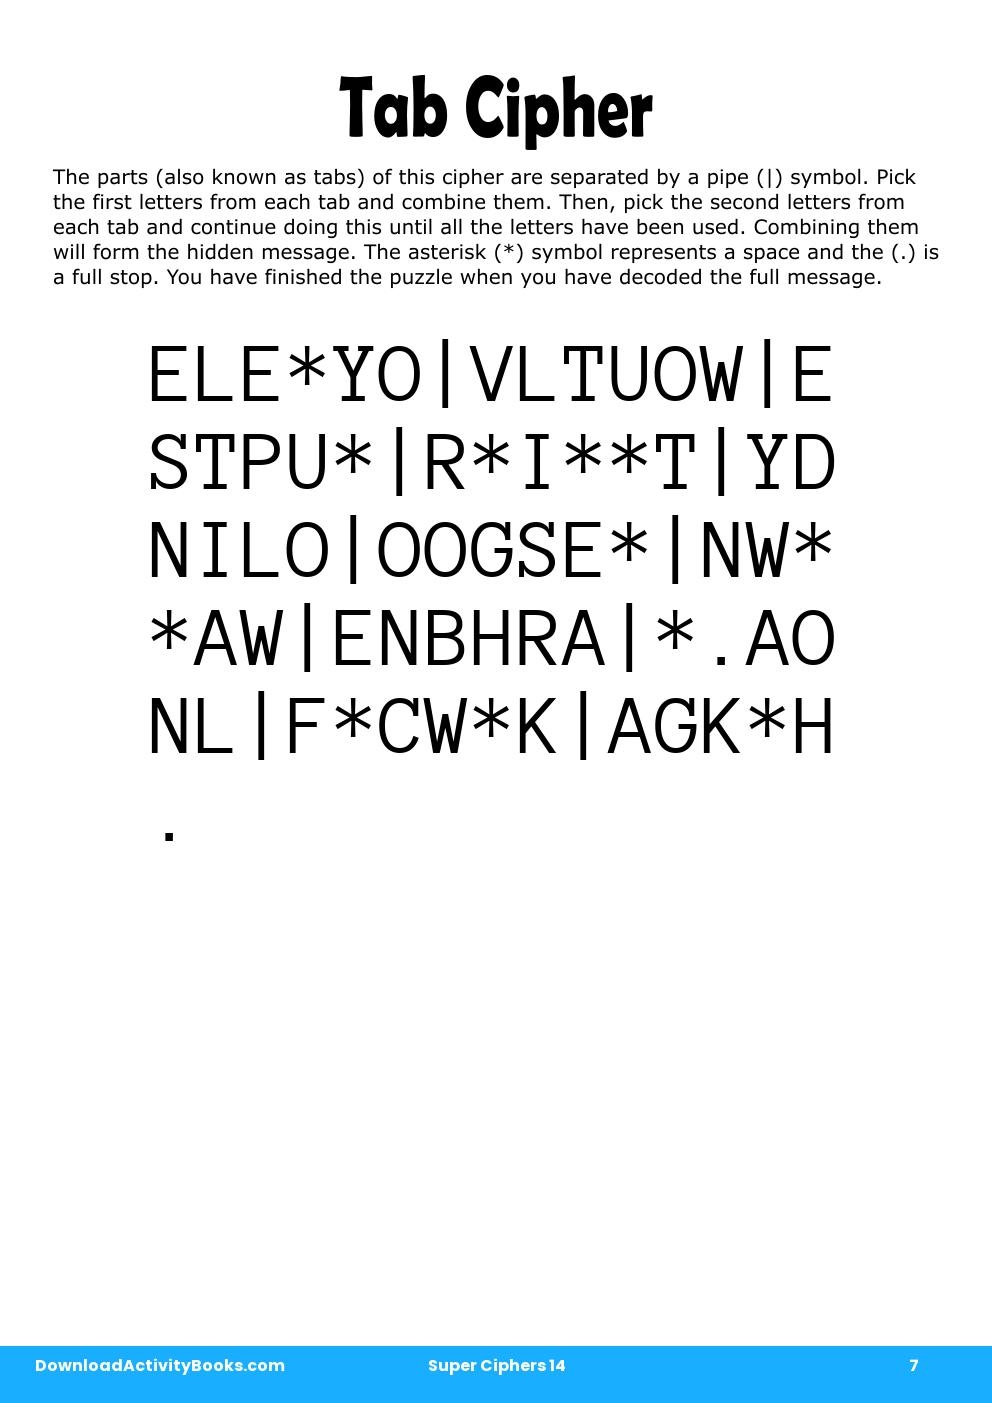 Tab Cipher in Super Ciphers 14